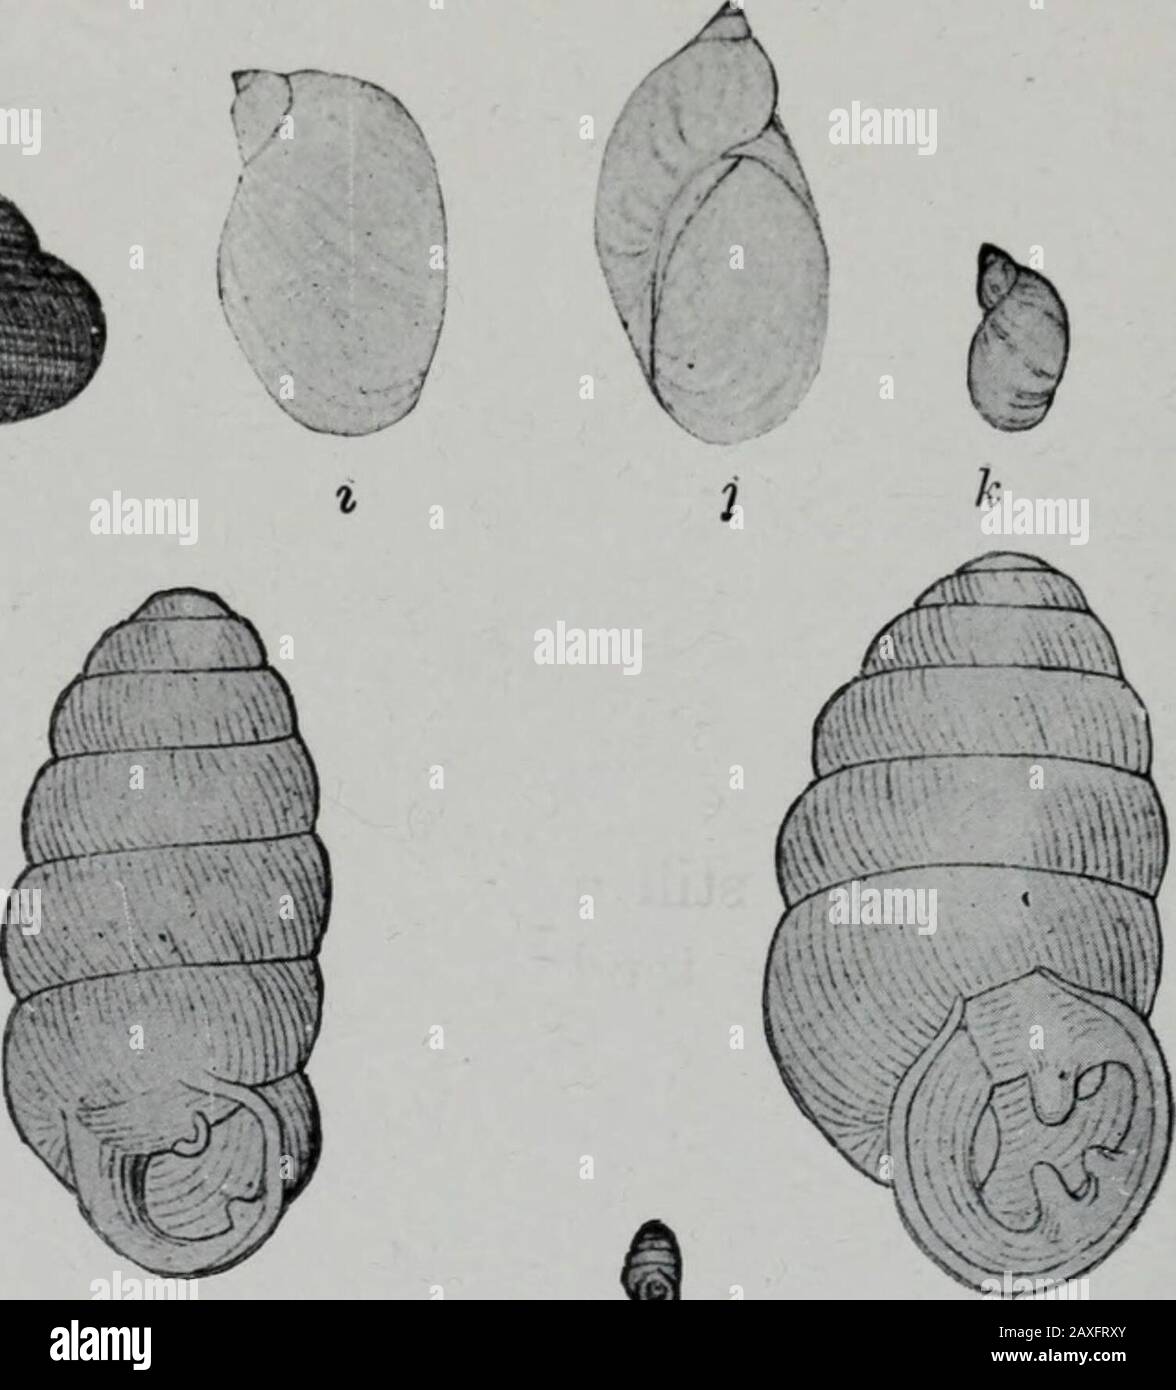 Geology . n. Fig. 526.—Loess Shells, a-b, Zonitoides minusculus (Binney); c-d, Euconulus julvus(Drap.); -/, Strobilops labyrinthica (Say); g, Polygyra clausa (Say); h, P. mul-tilineata (Say); i-j, Succinea obliqua Say; k, S. avara Say; l-m, Polygyramonodon (Rack); n, Bifidaria pentodon (Say); o, B. corticaria (Say); p, B.mus-corum (Linn.); q, B. armifera (Say). The small figures adjacent to some of thelarge ones show the natural size of the shells. relation to them. This is conceded, without proving that the loessis fluvial. By the aqueous hypothesis, the loess is assigned to direct deposi-tio Stock Photo